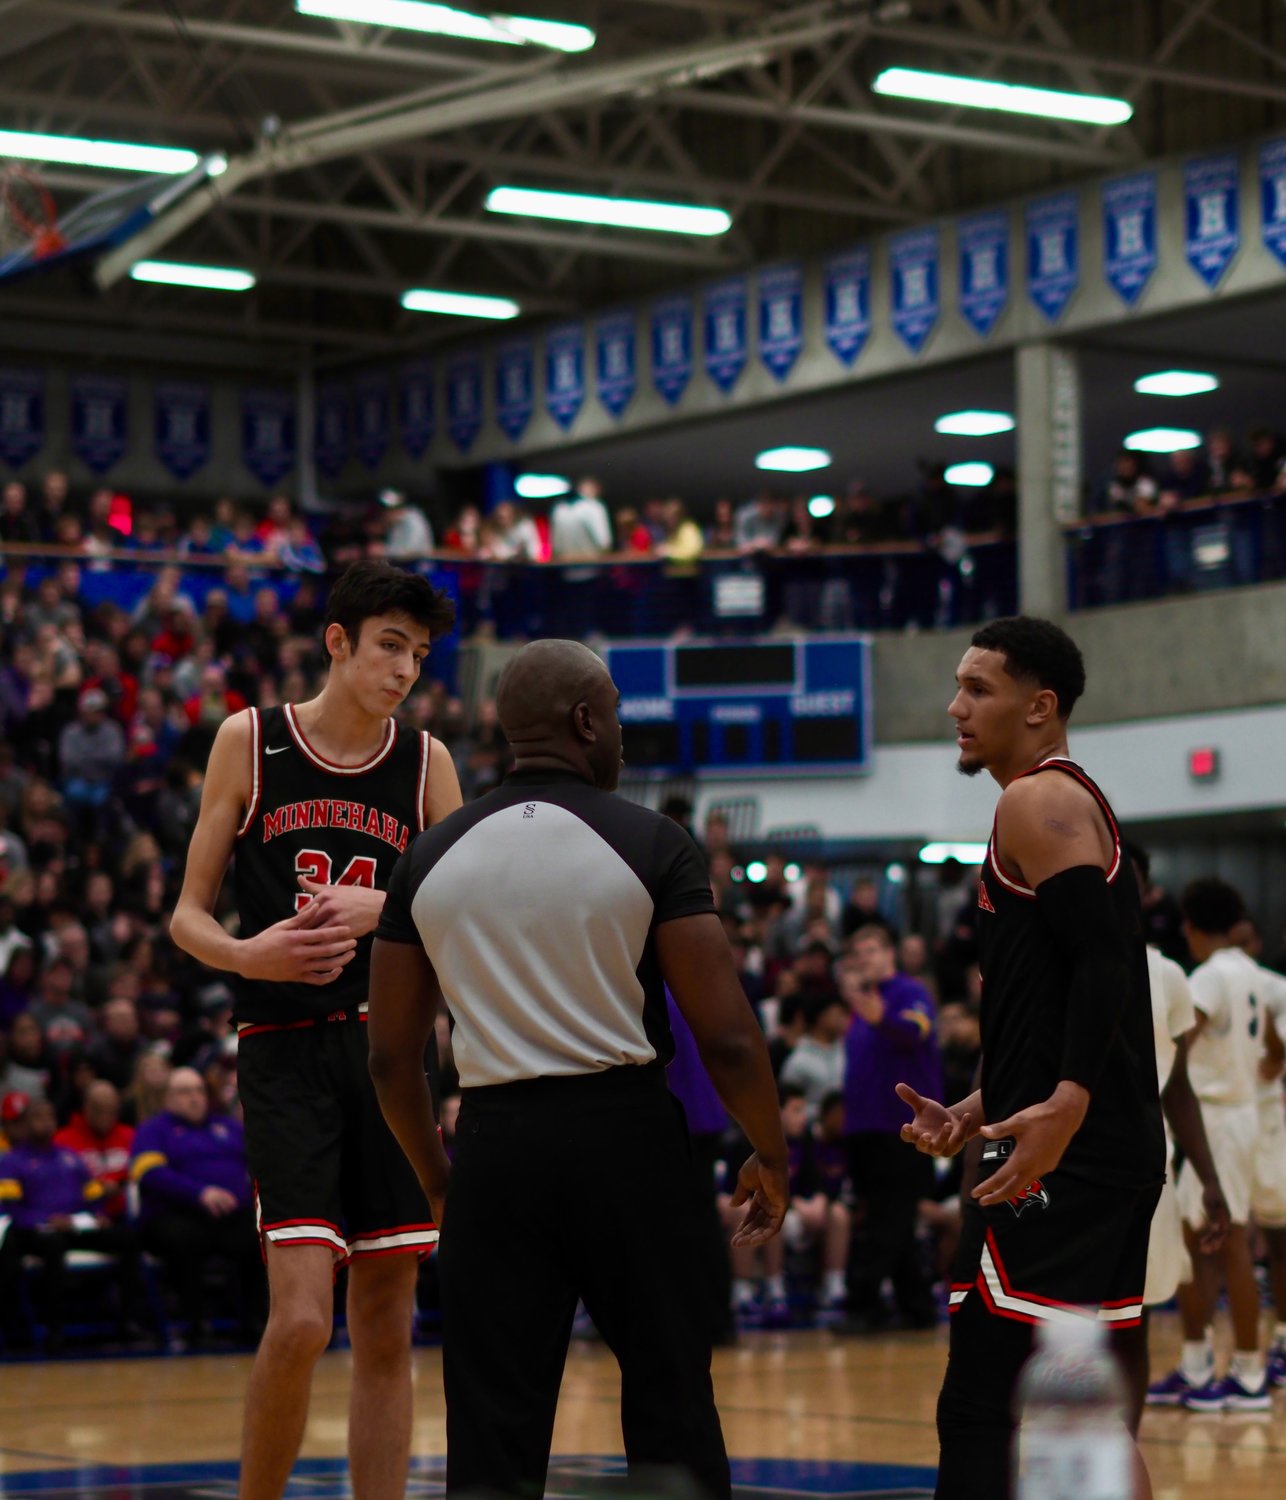 Minnehaha Academy boosted both Chet Holmgren (number 34) and Jalen Suggs (number 1) on last year's award-winning team. Holmgren was named Mr. Basketball after leading the Redhawks to the Class 2A state title on April 10, 2021. He is heading to Gonzaga next year. (Photos submitted)